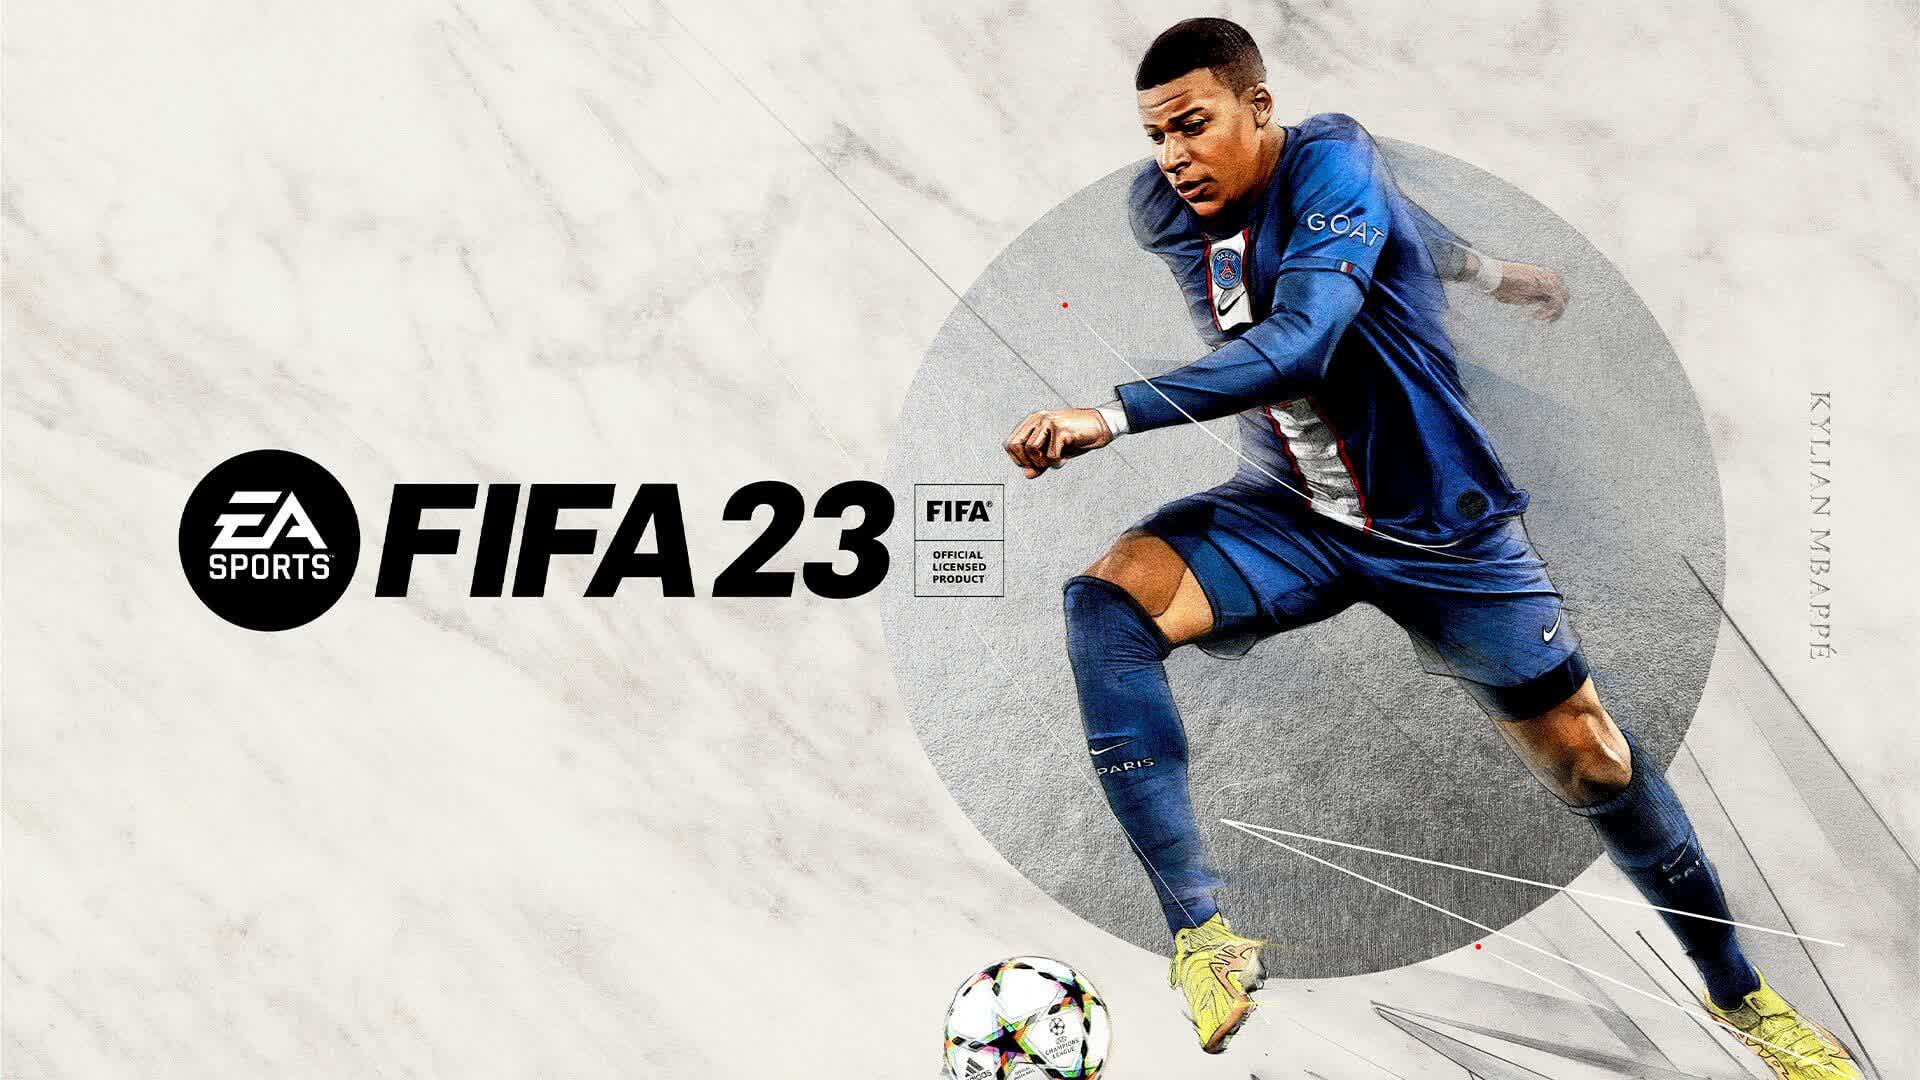 FIFA 23 is trying to correctly predict the World Cup winner for the fourth time in a row